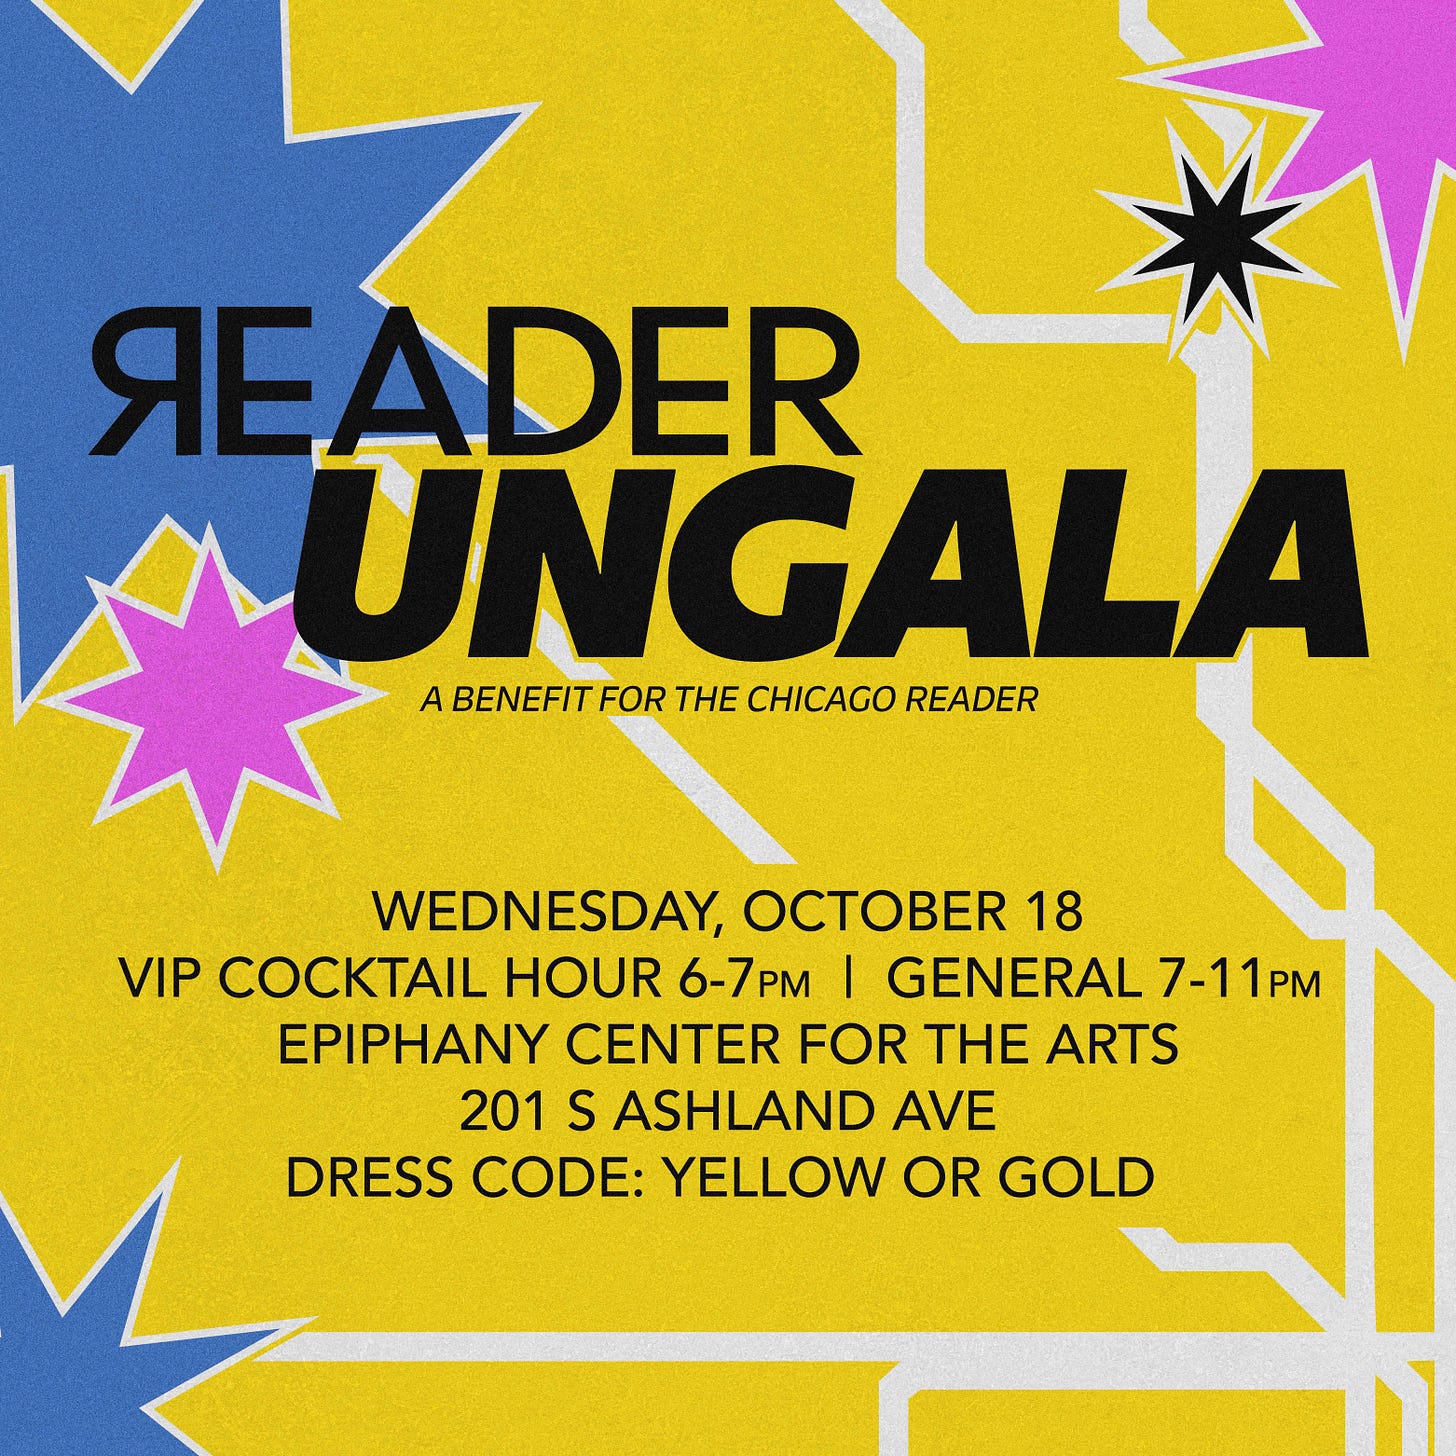 Graphic promoting the Chicago Reader Ungala